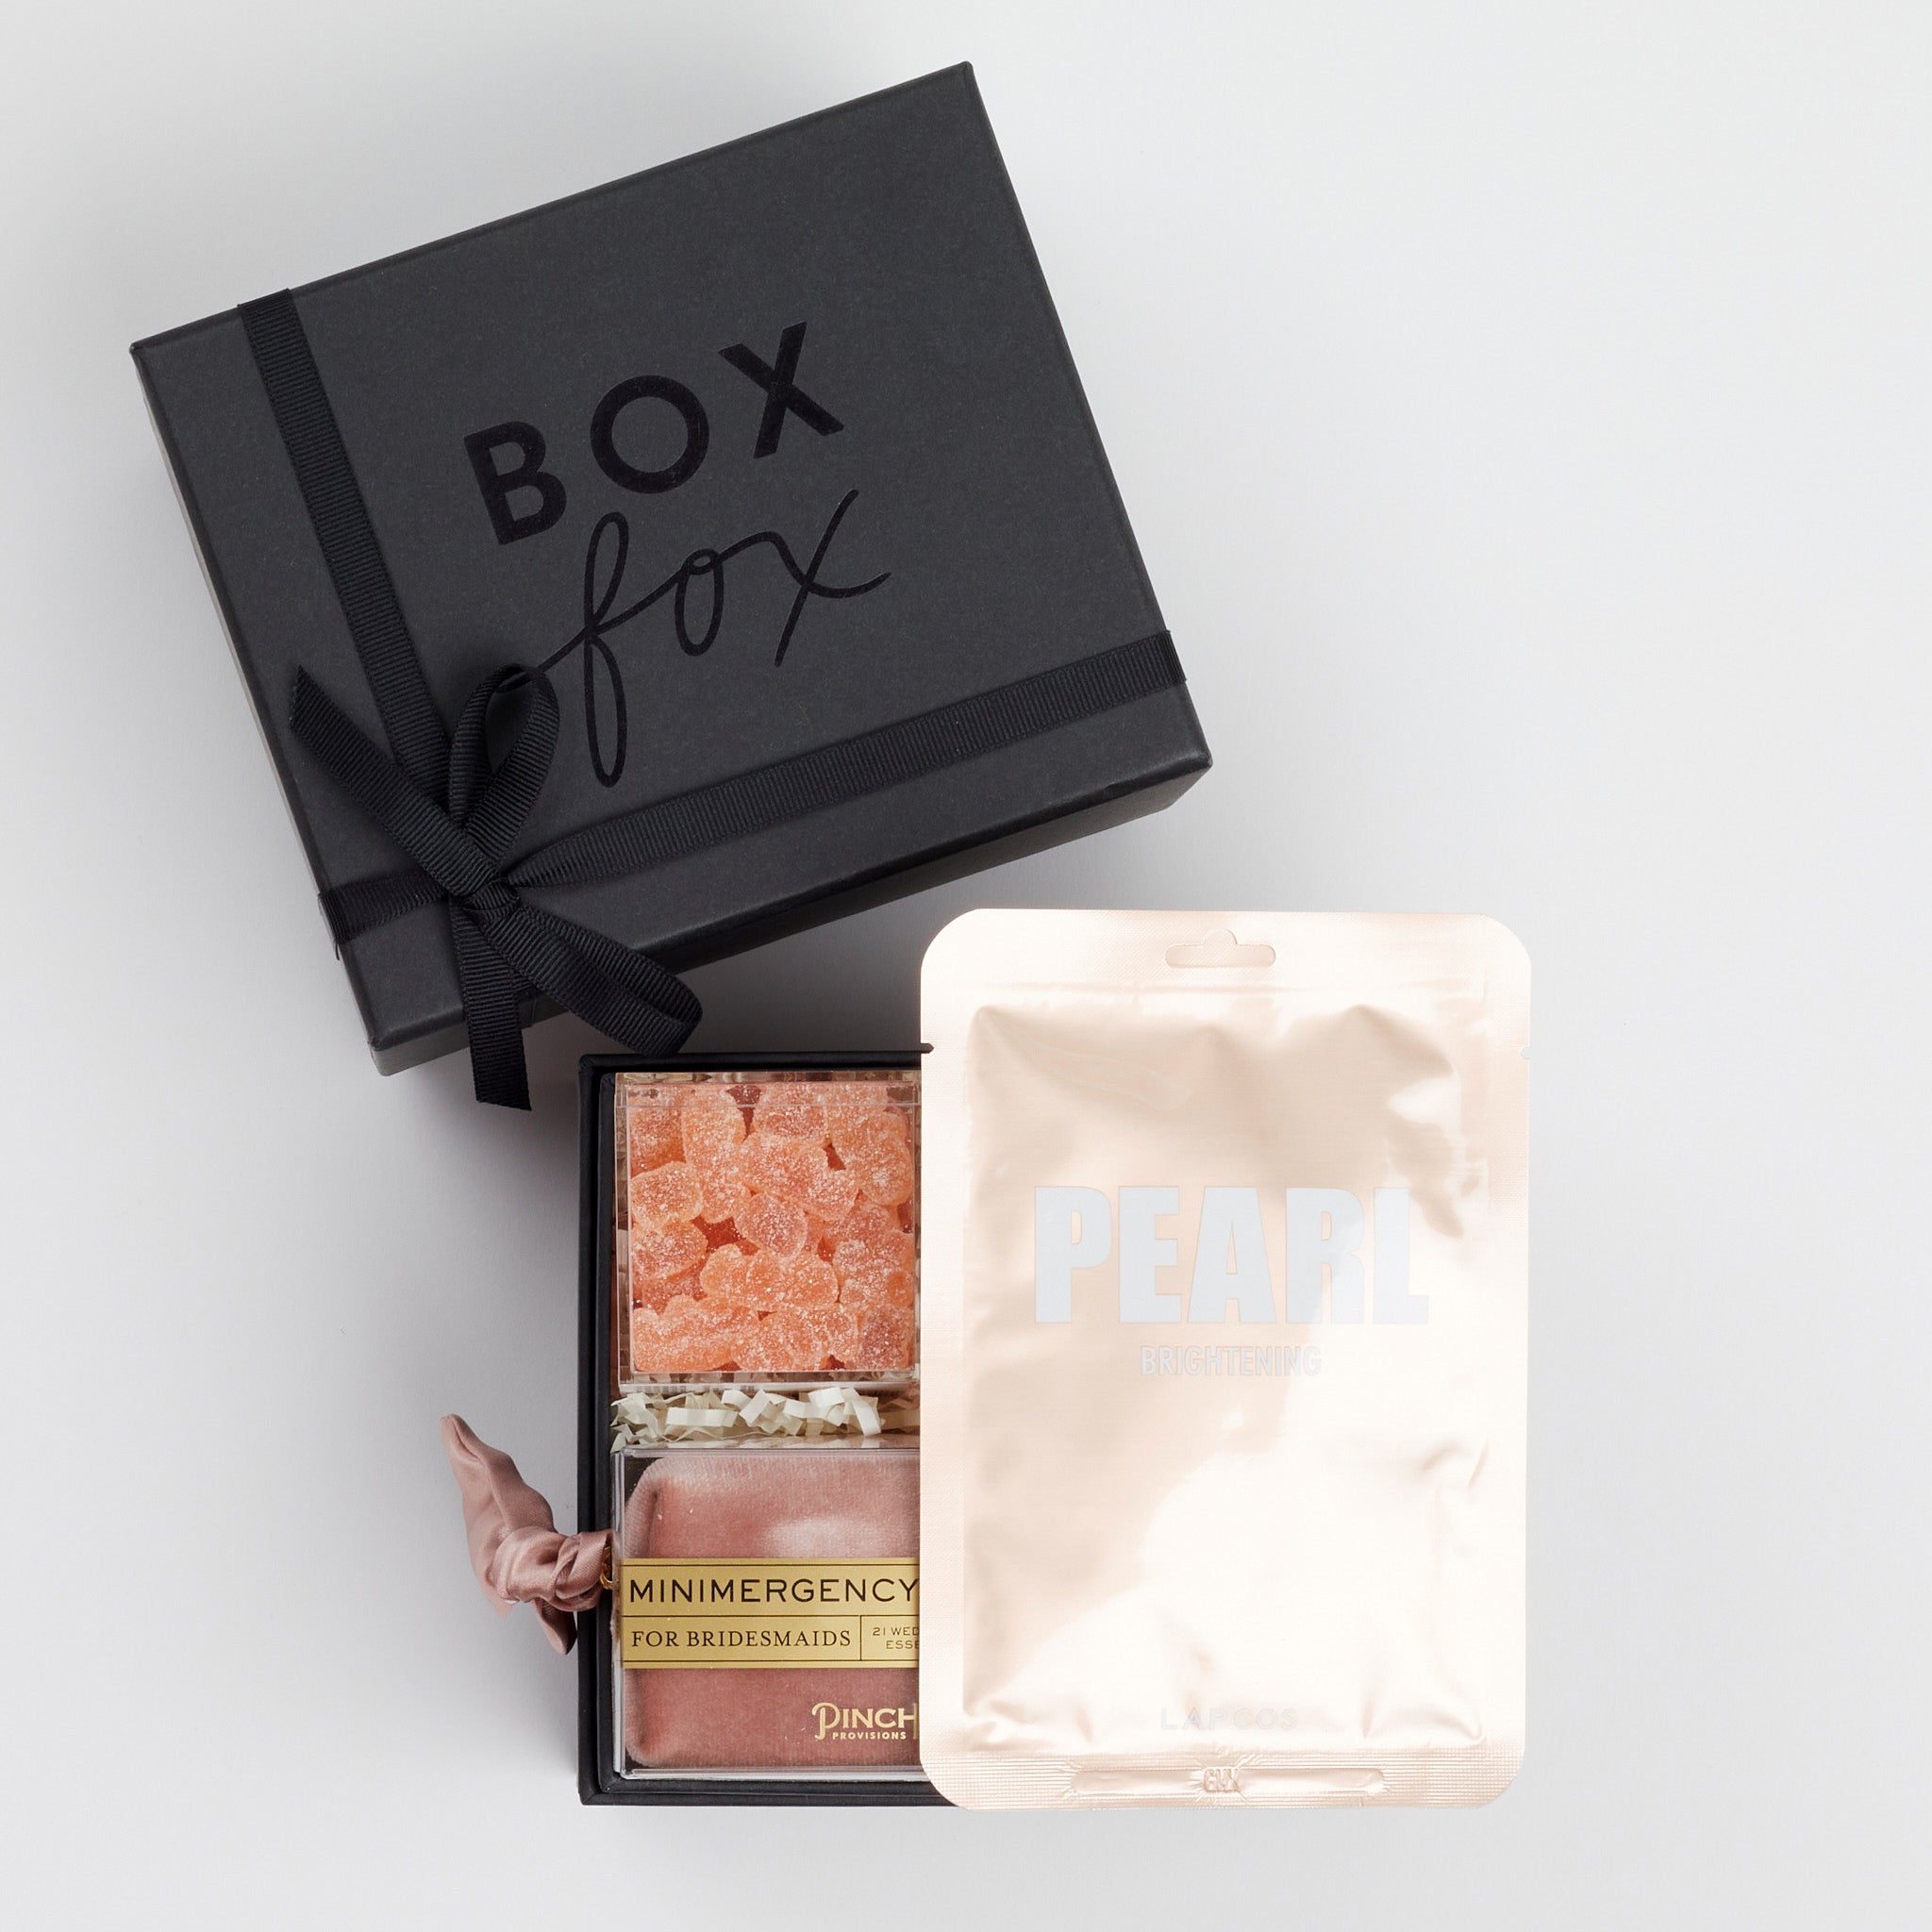 BOXFOX Bridesmaid Gift Box in Matte Black with Lapcos Pearl Brightening Mask, Sugarfina sparkling pink gummies, Pinch Provisions pinch velvet bridesmaids essential kit